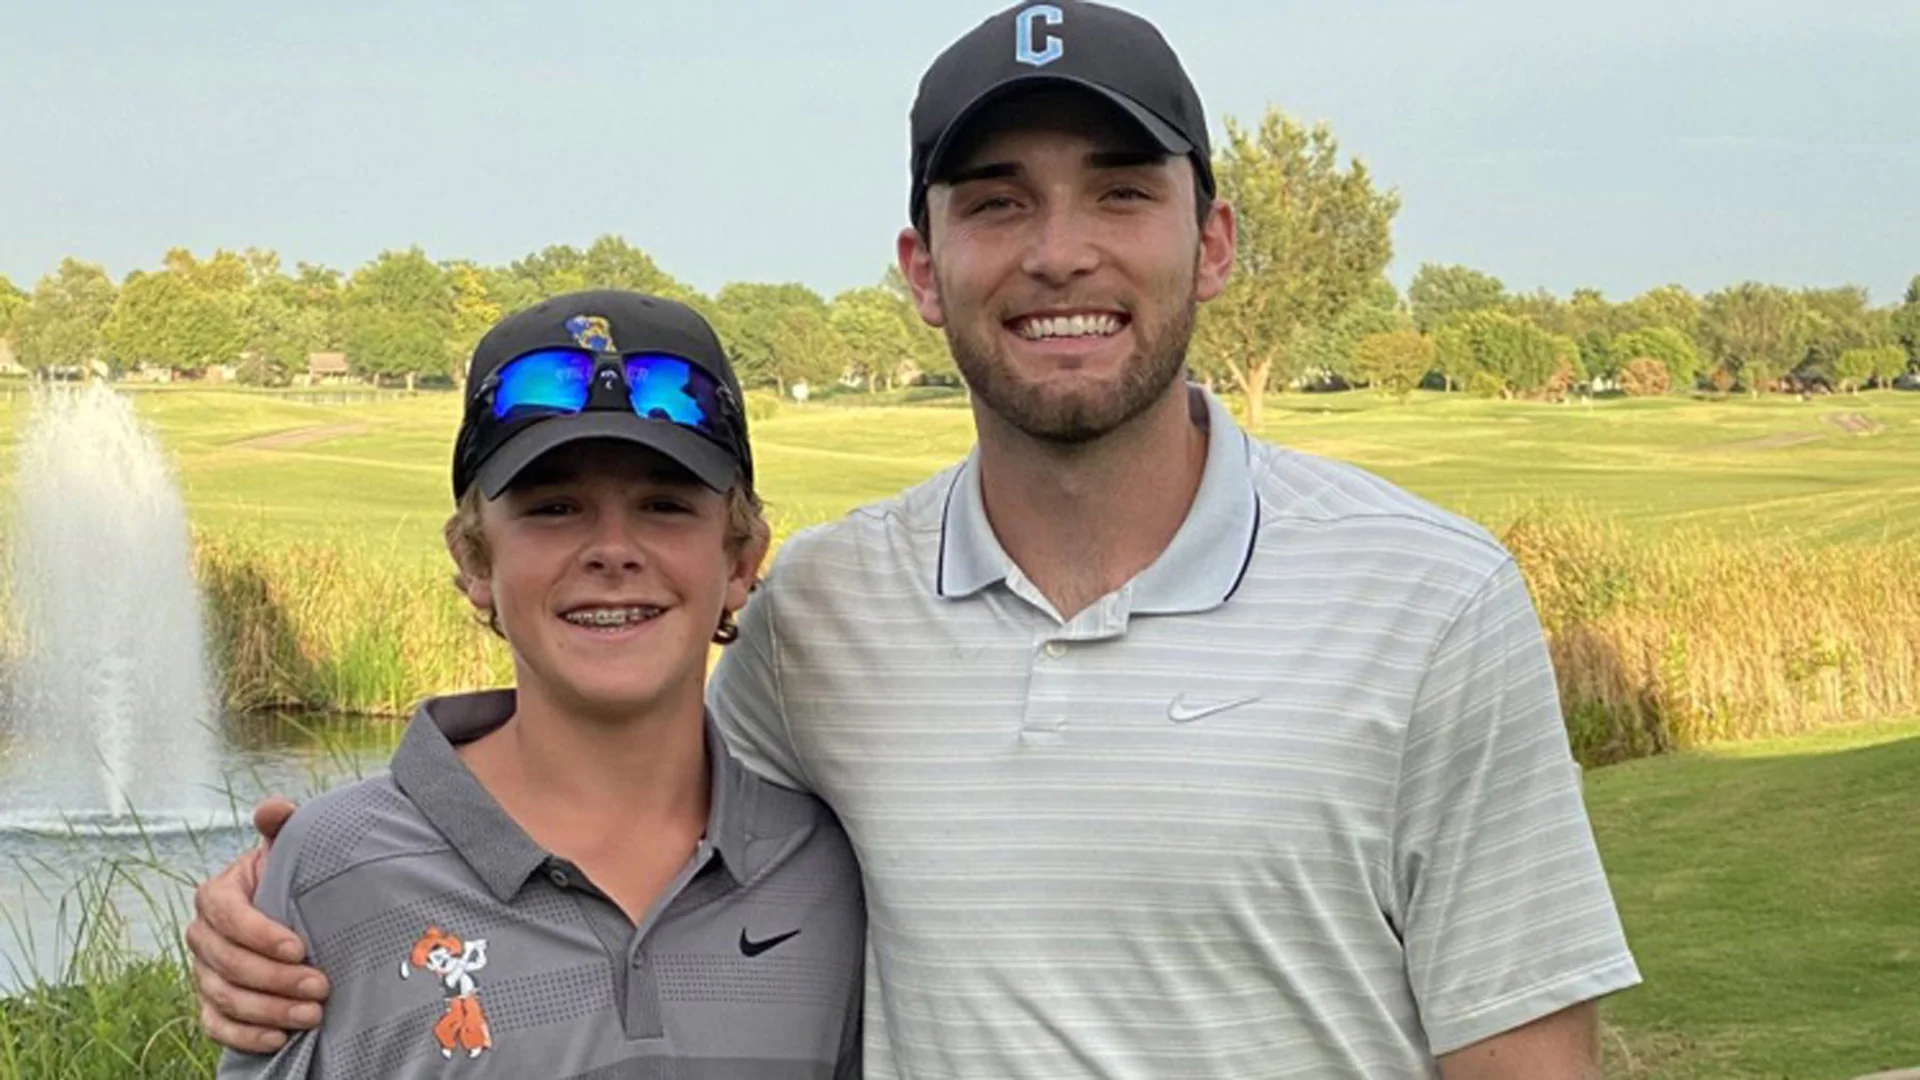 A world record is tied as pro golfer shoots 55 in Oklahoma